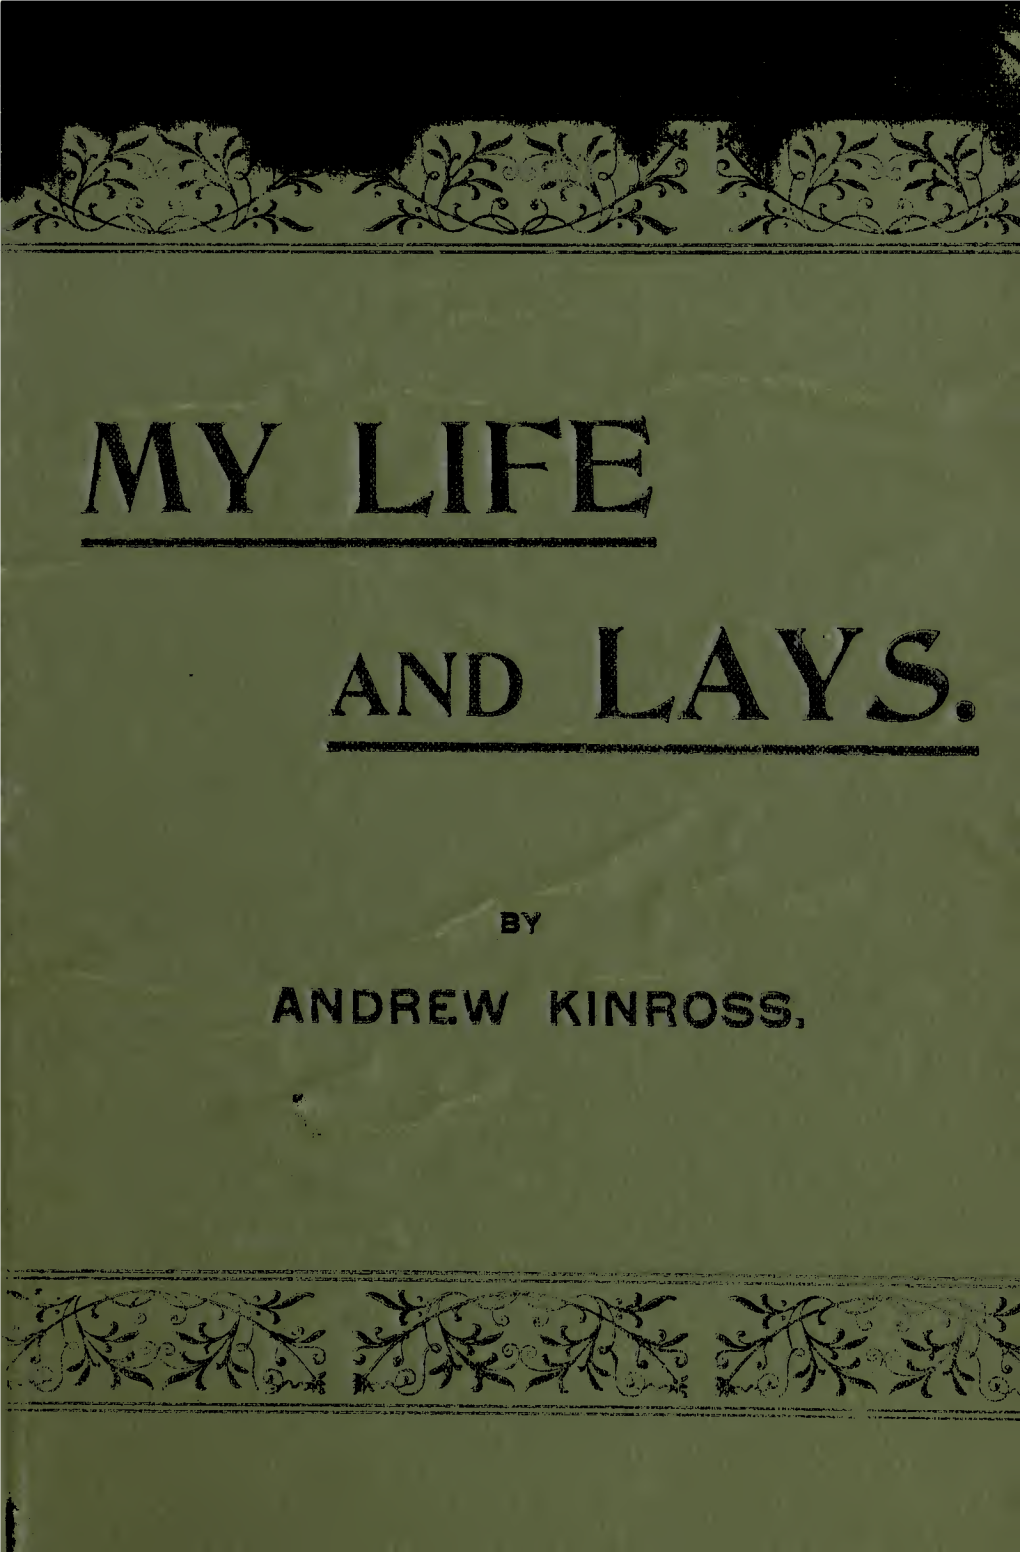 My Life and Lays. by Andrew Kinross